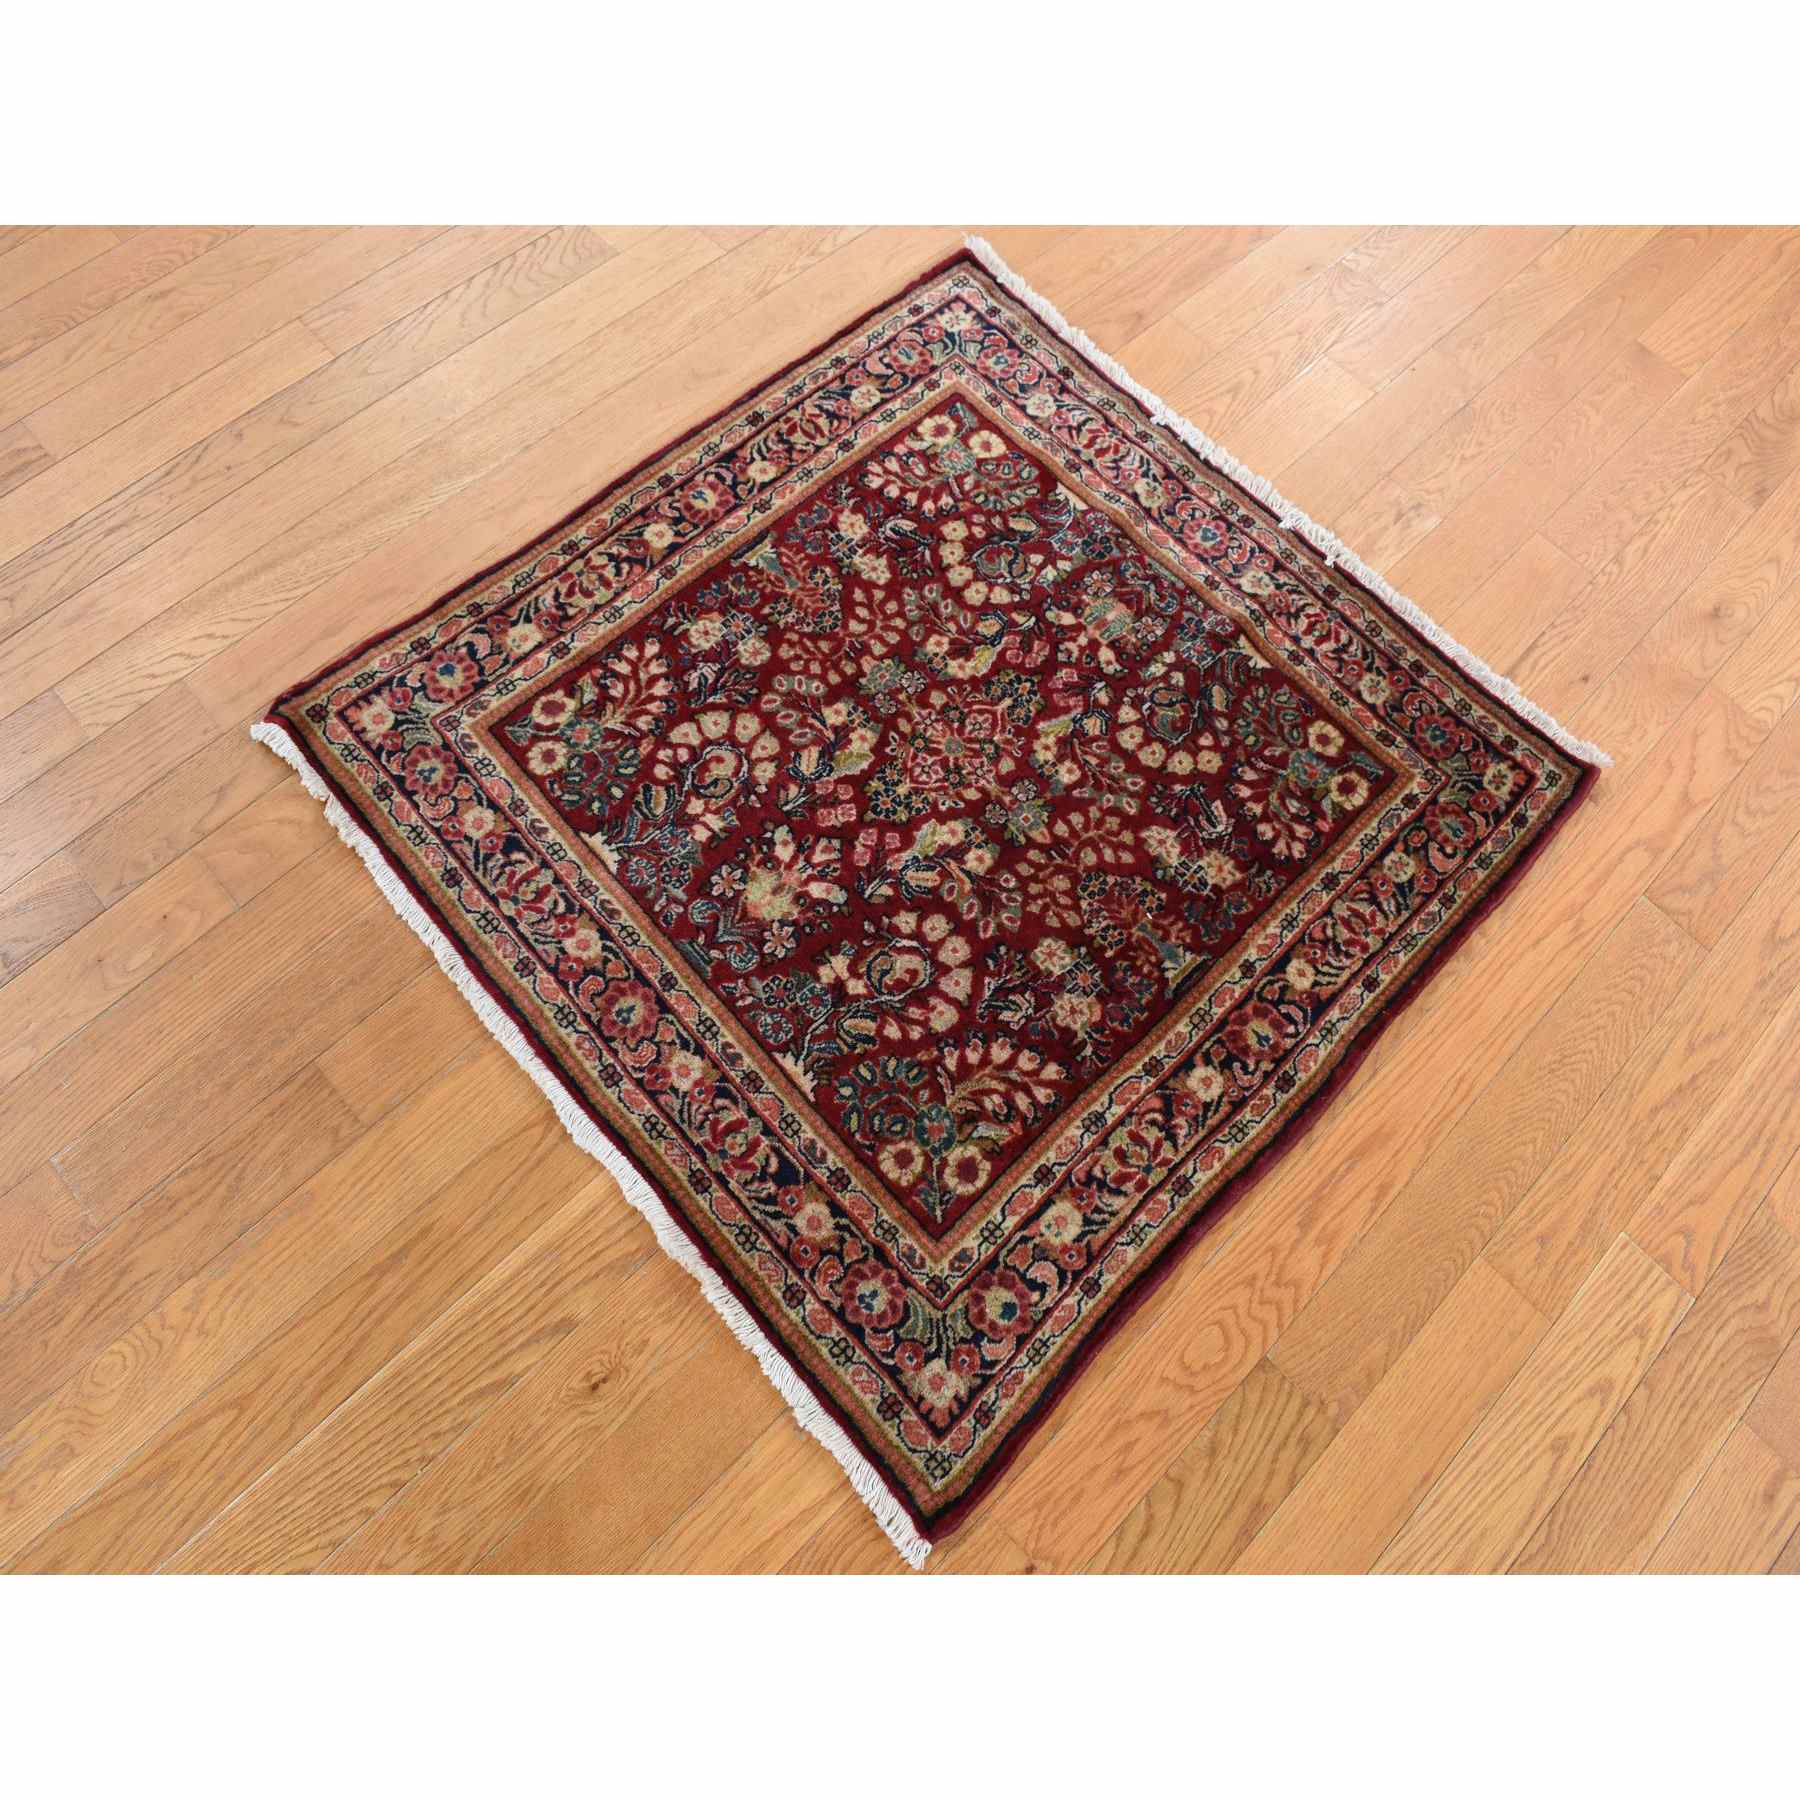 Antique-Hand-Knotted-Rug-438200